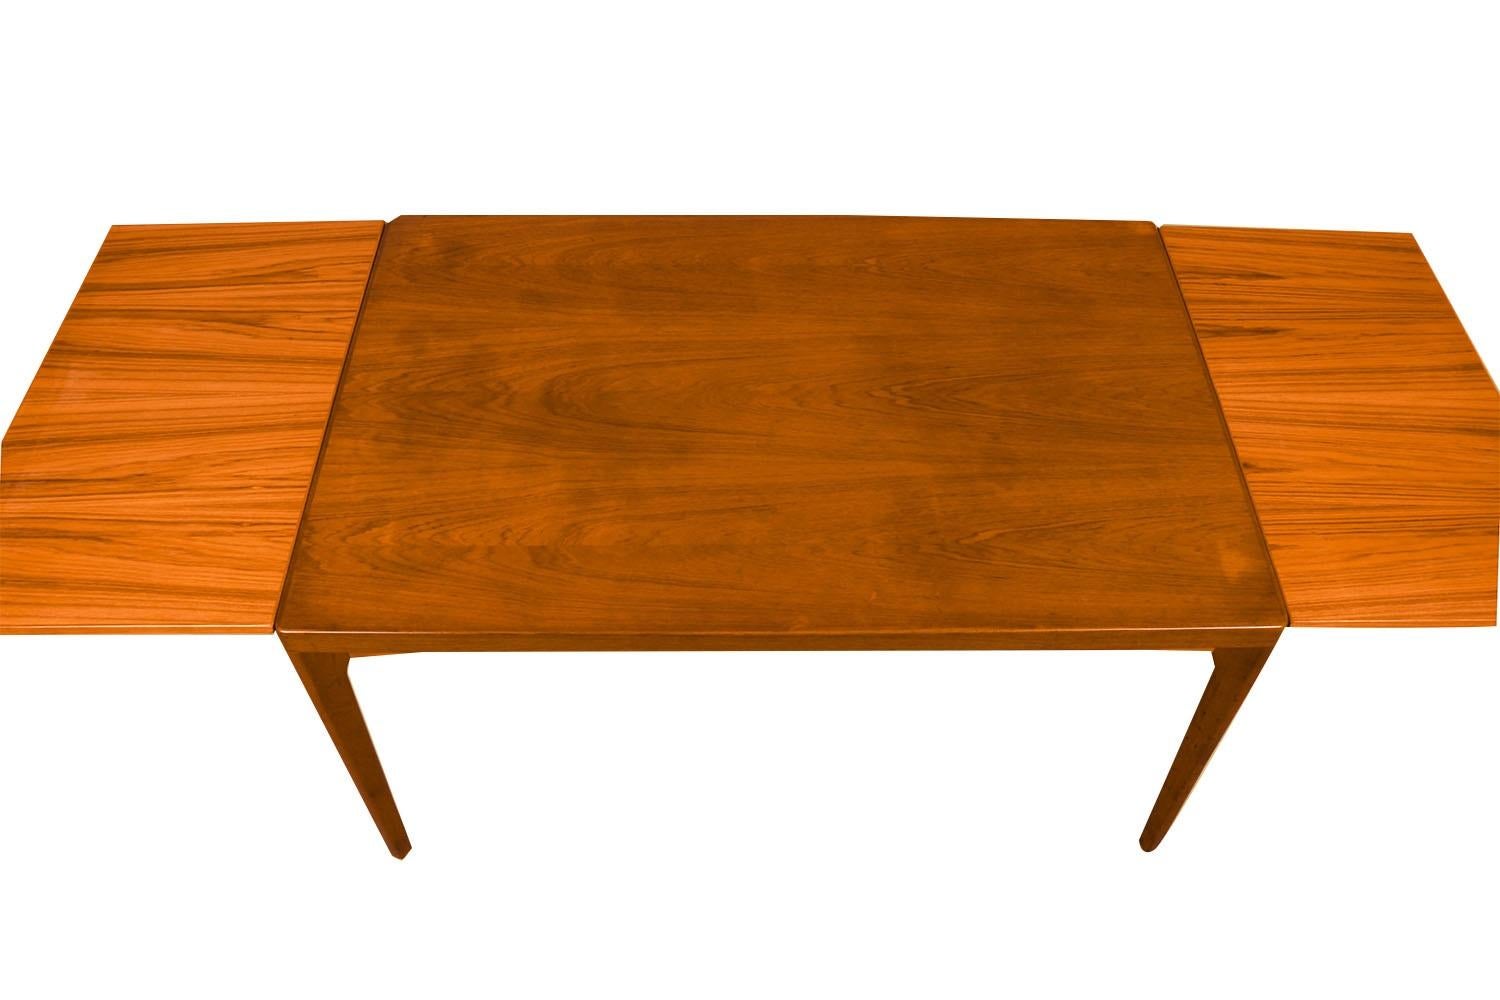 An exceptional Danish Modern teak extension dining table designed by Henning Kjaernulf for Vejle Stole og Møbelfabrik. With an initial large footprint, this table can also offer a generous space and double in size once its draw leaves are extended.